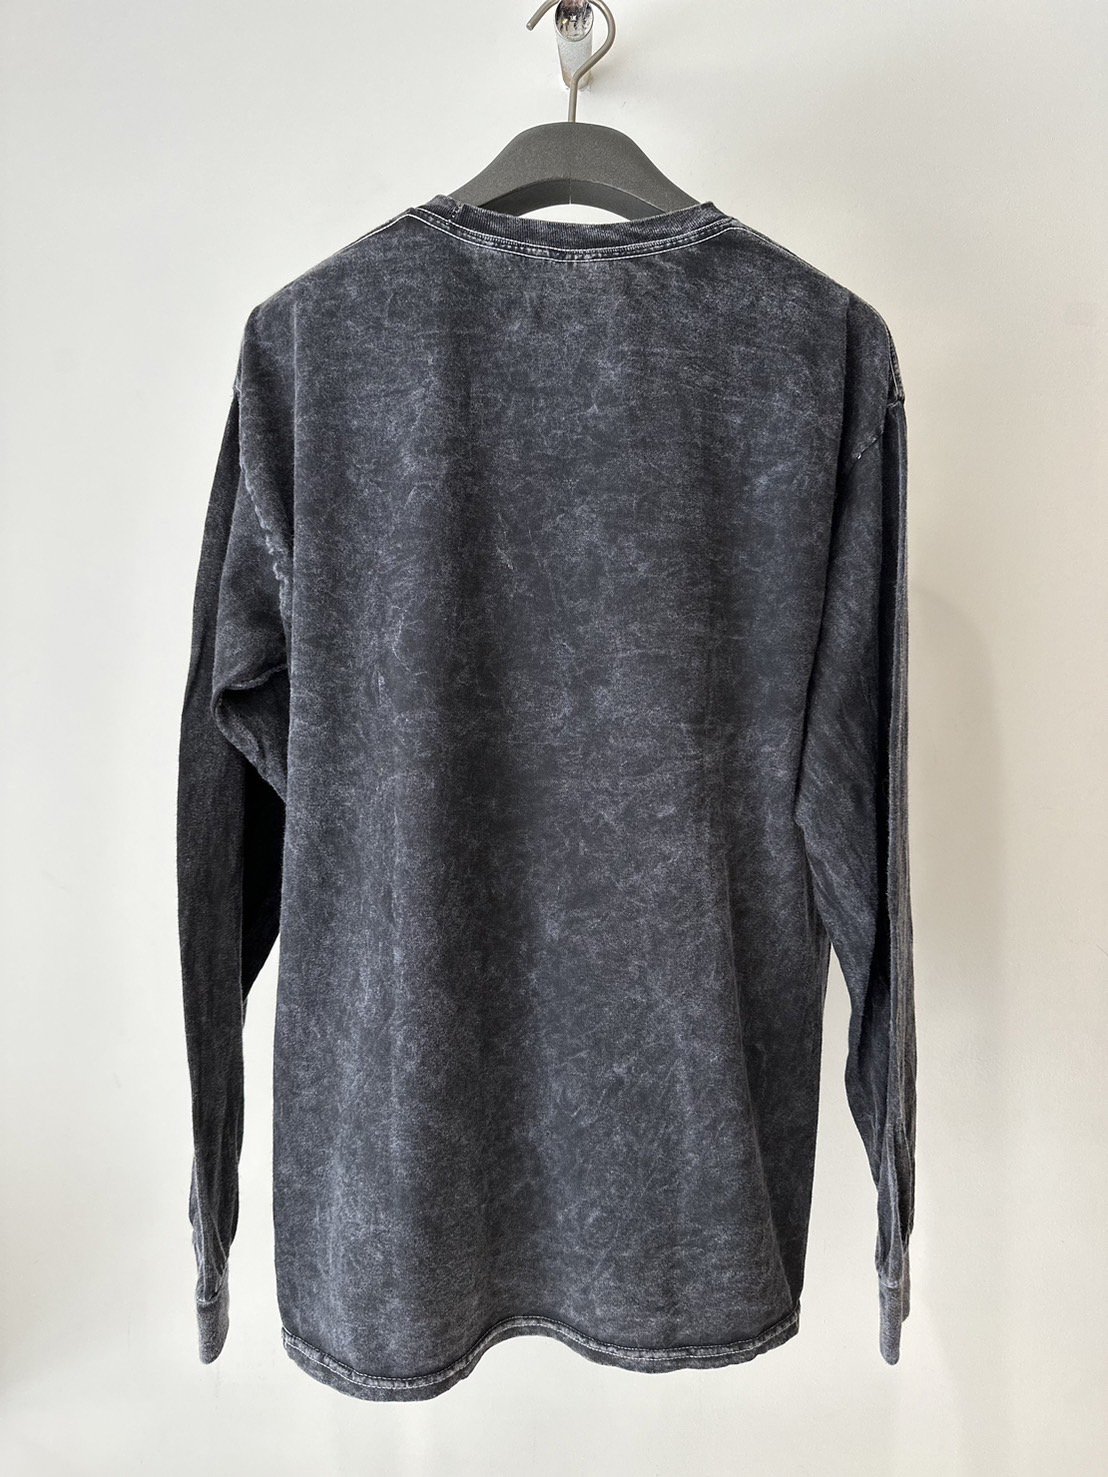 BLUESCENTRIC<br />JANIS JOPLIN MINERAL WASH L/S / BLACK(MINERAL WASH)<img class='new_mark_img2' src='https://img.shop-pro.jp/img/new/icons47.gif' style='border:none;display:inline;margin:0px;padding:0px;width:auto;' />